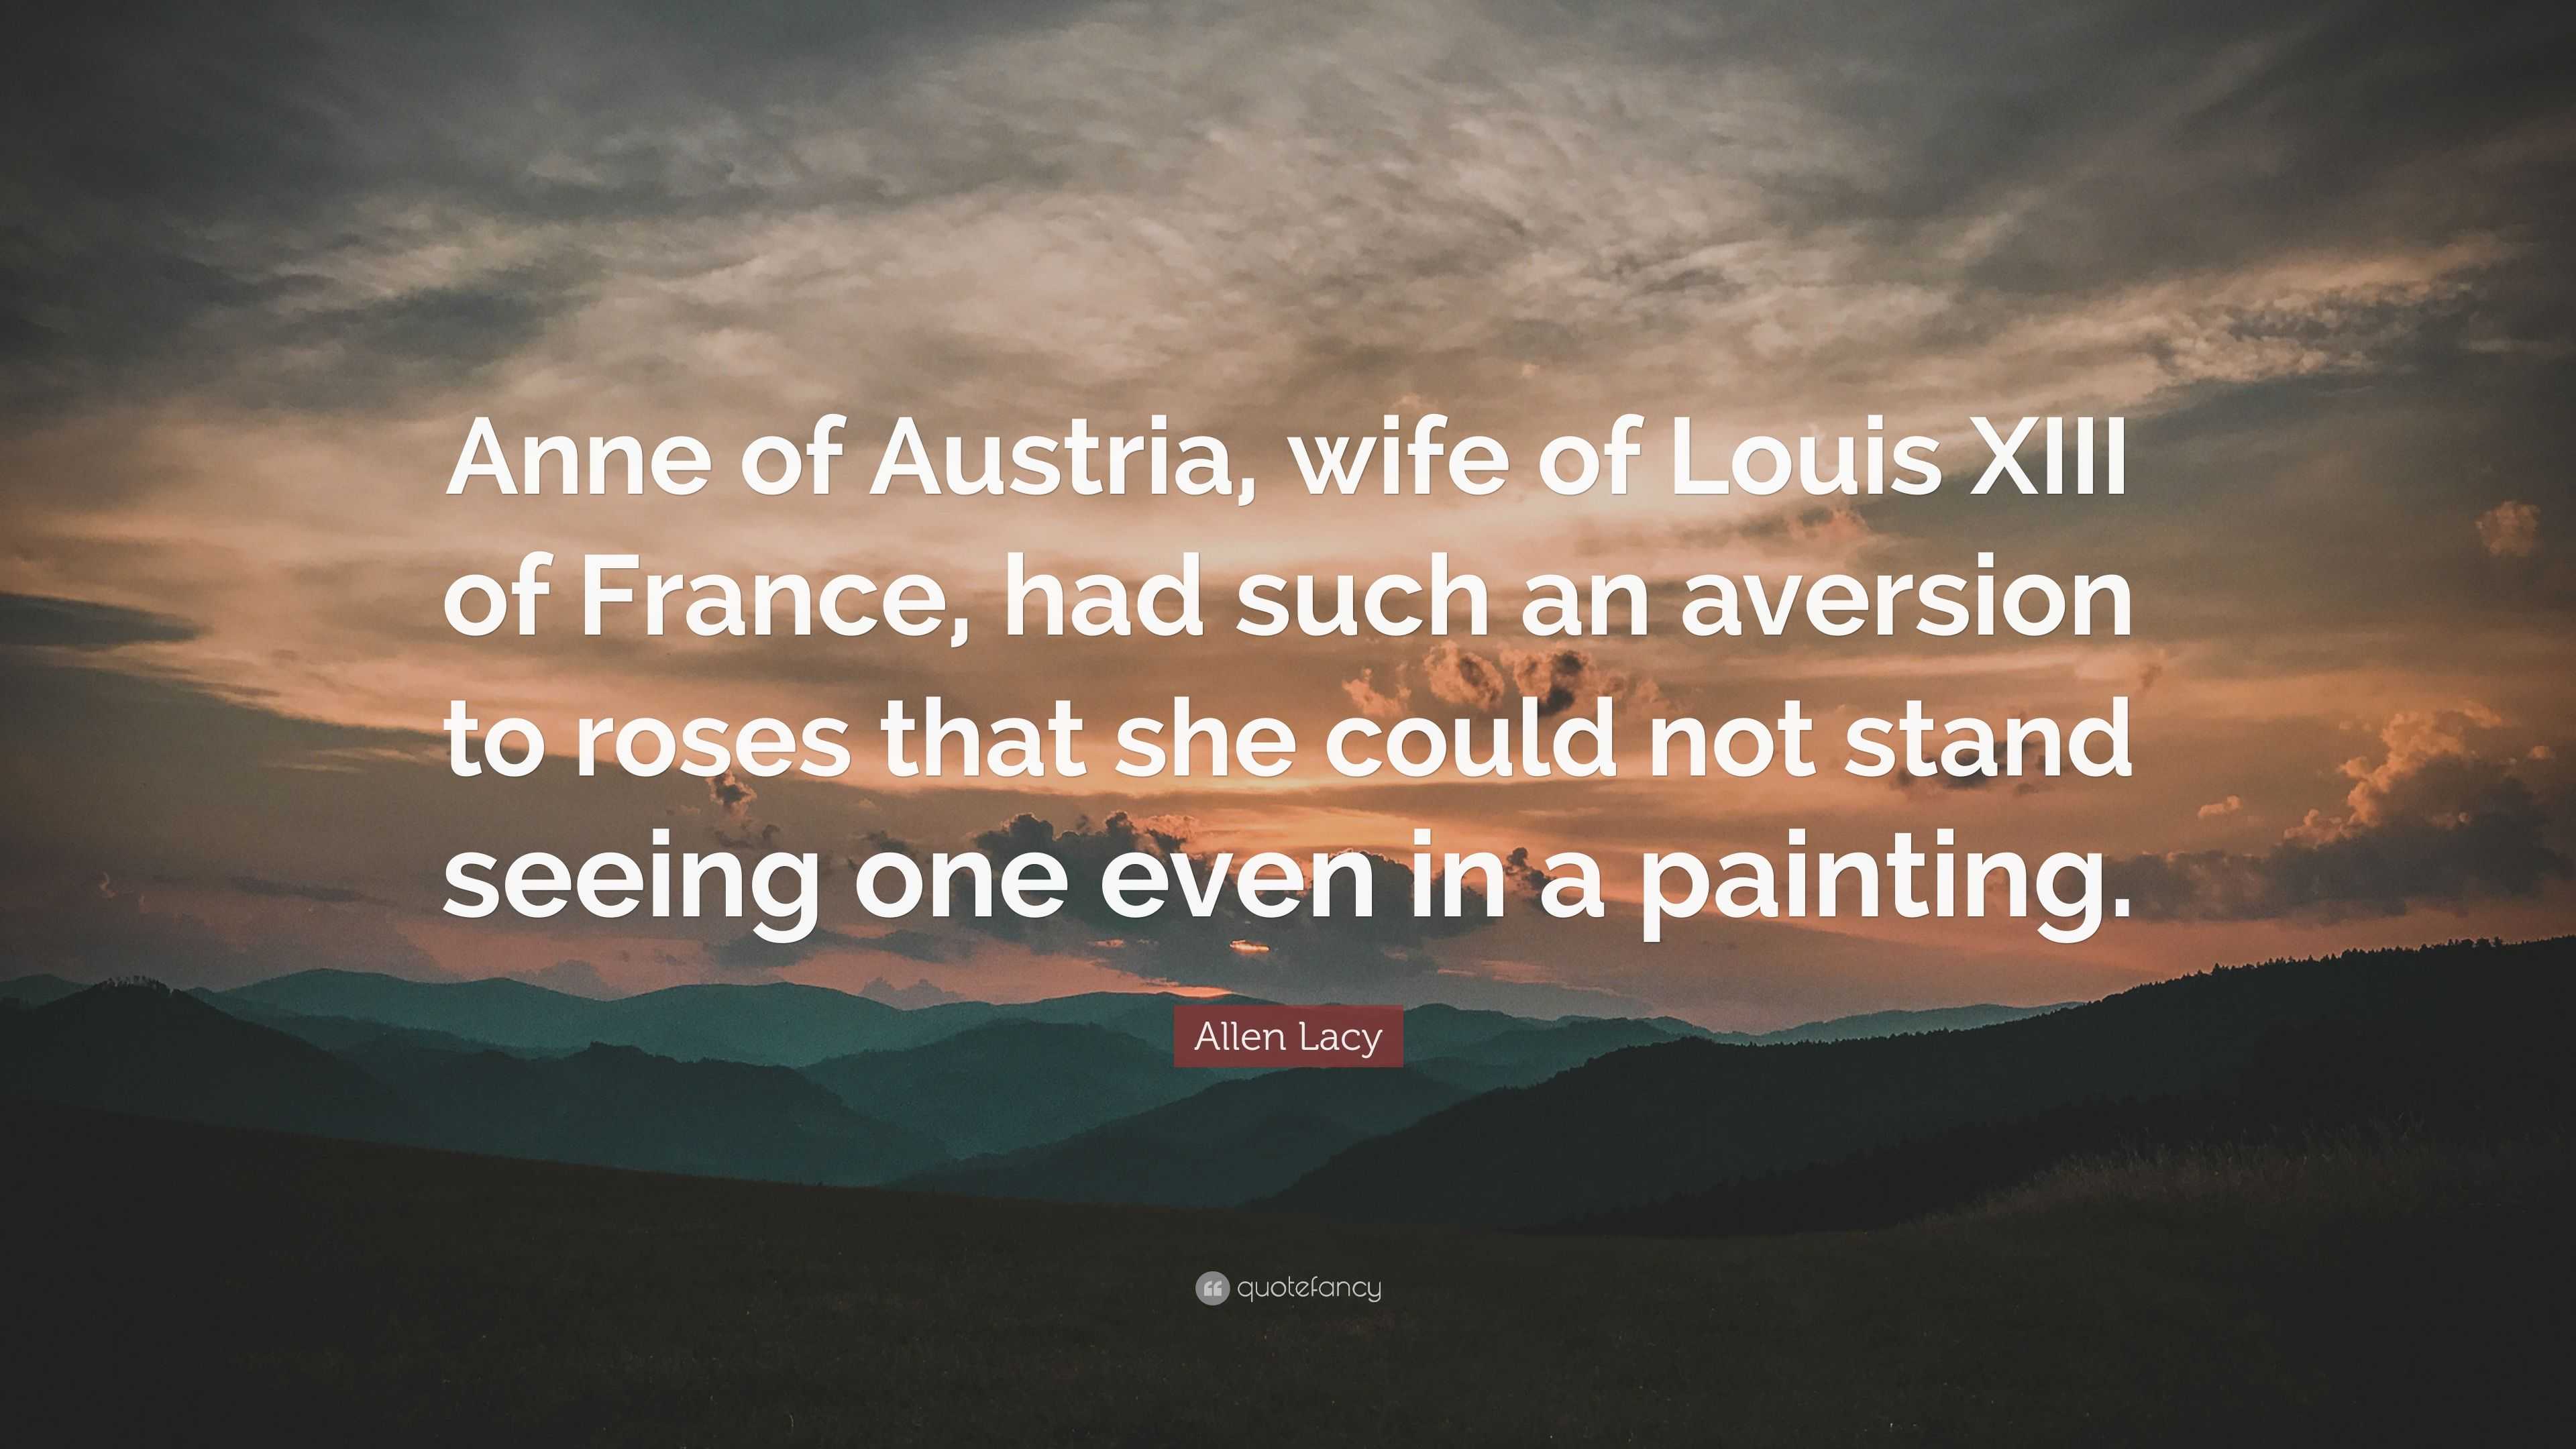 Allen Lacy Quote: “Anne of Austria, wife of Louis XIII of France